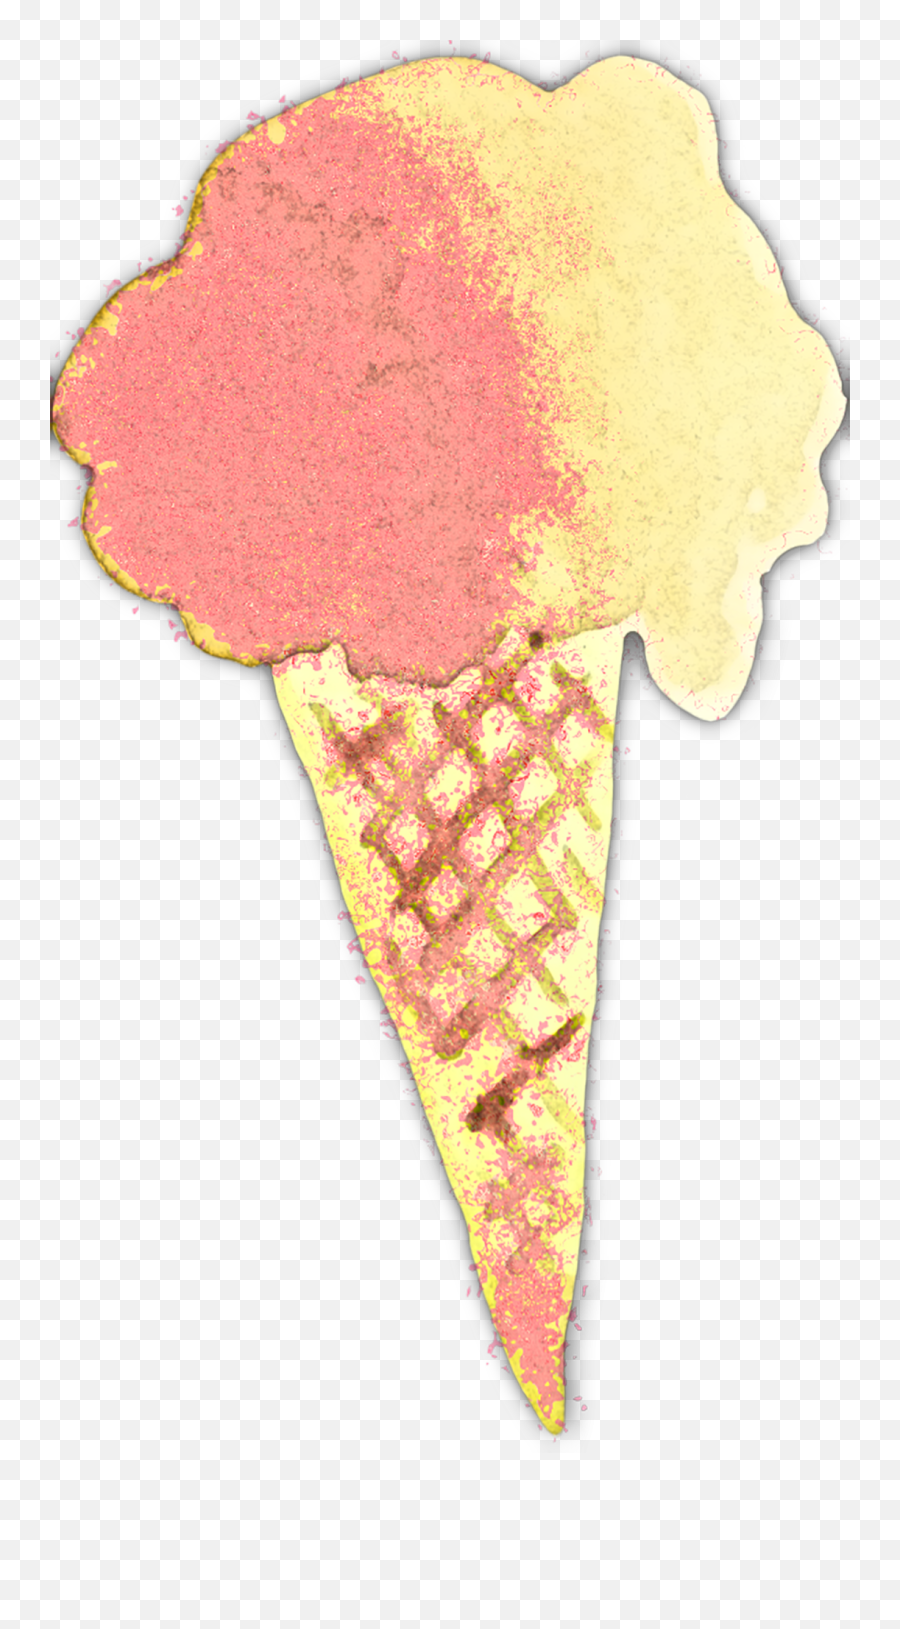 Abstract Ice Cream Cone Png Free Stock Photo - Public Domain Cone Emoji,Abstract Png